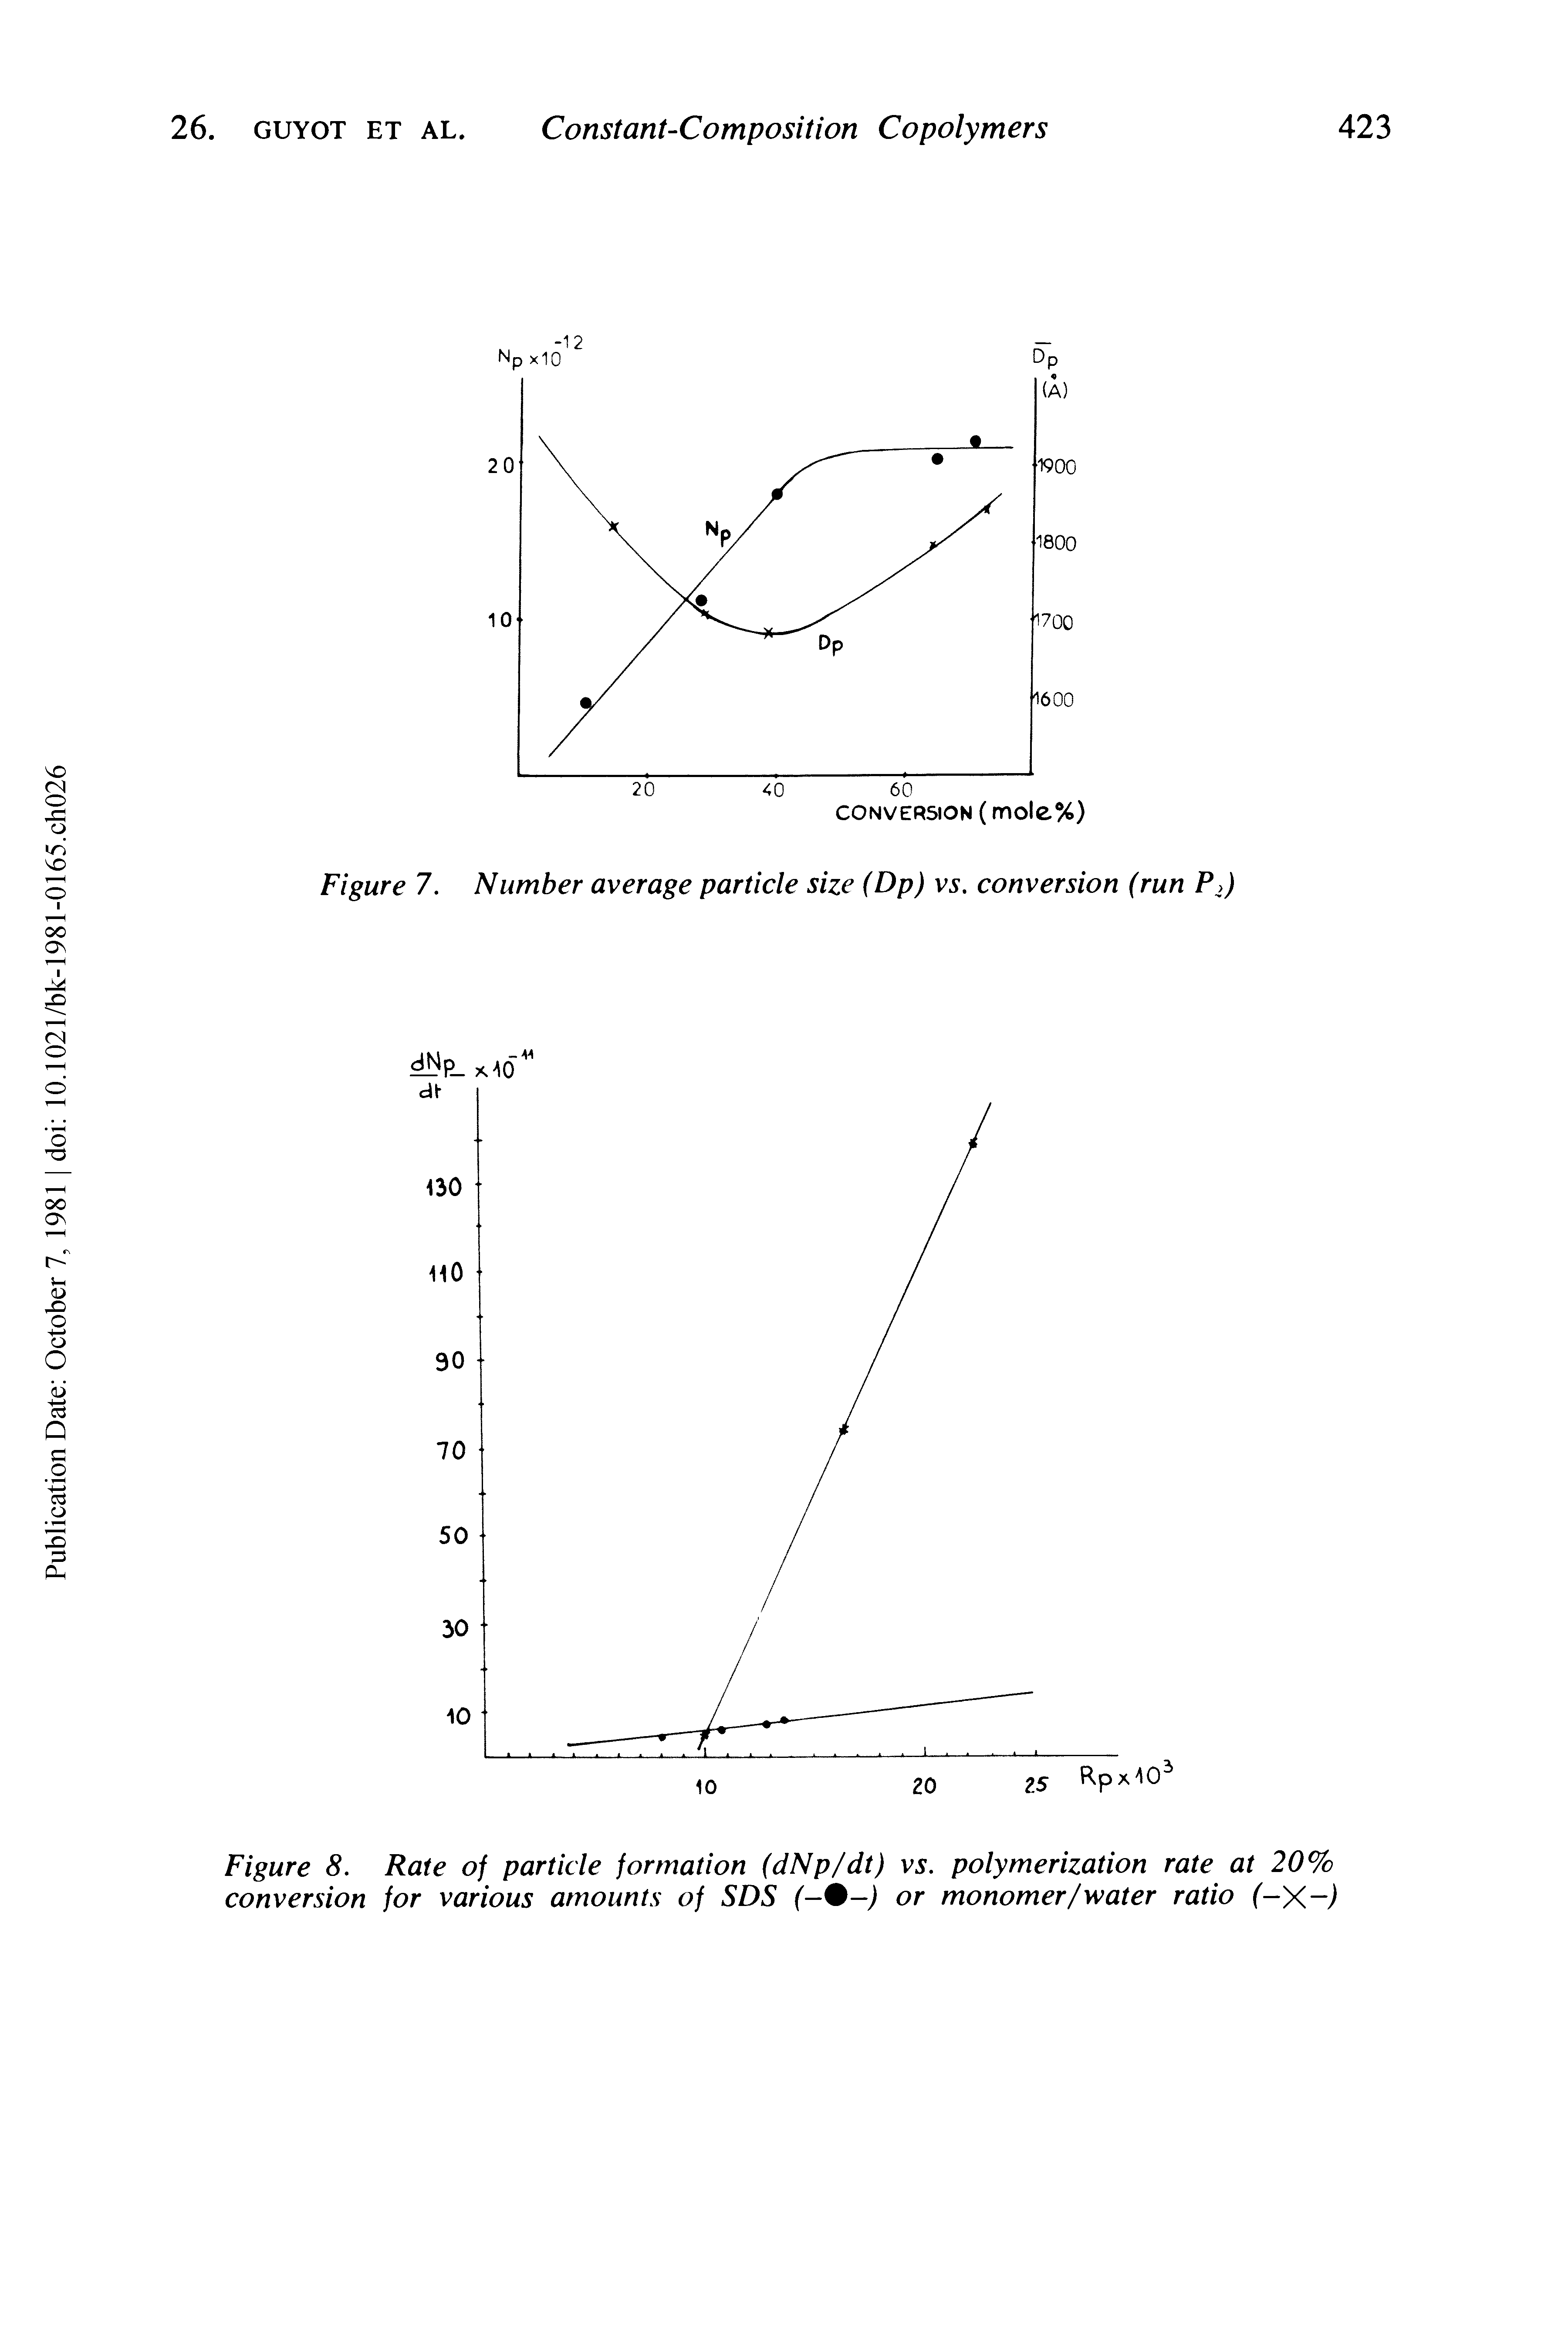 Figure 8. Rate of particle formation (dNp/dt) vs. polymerization rate at 20% conversion for various amounts of SDS (-%-) or monomer/water ratio ( X )...